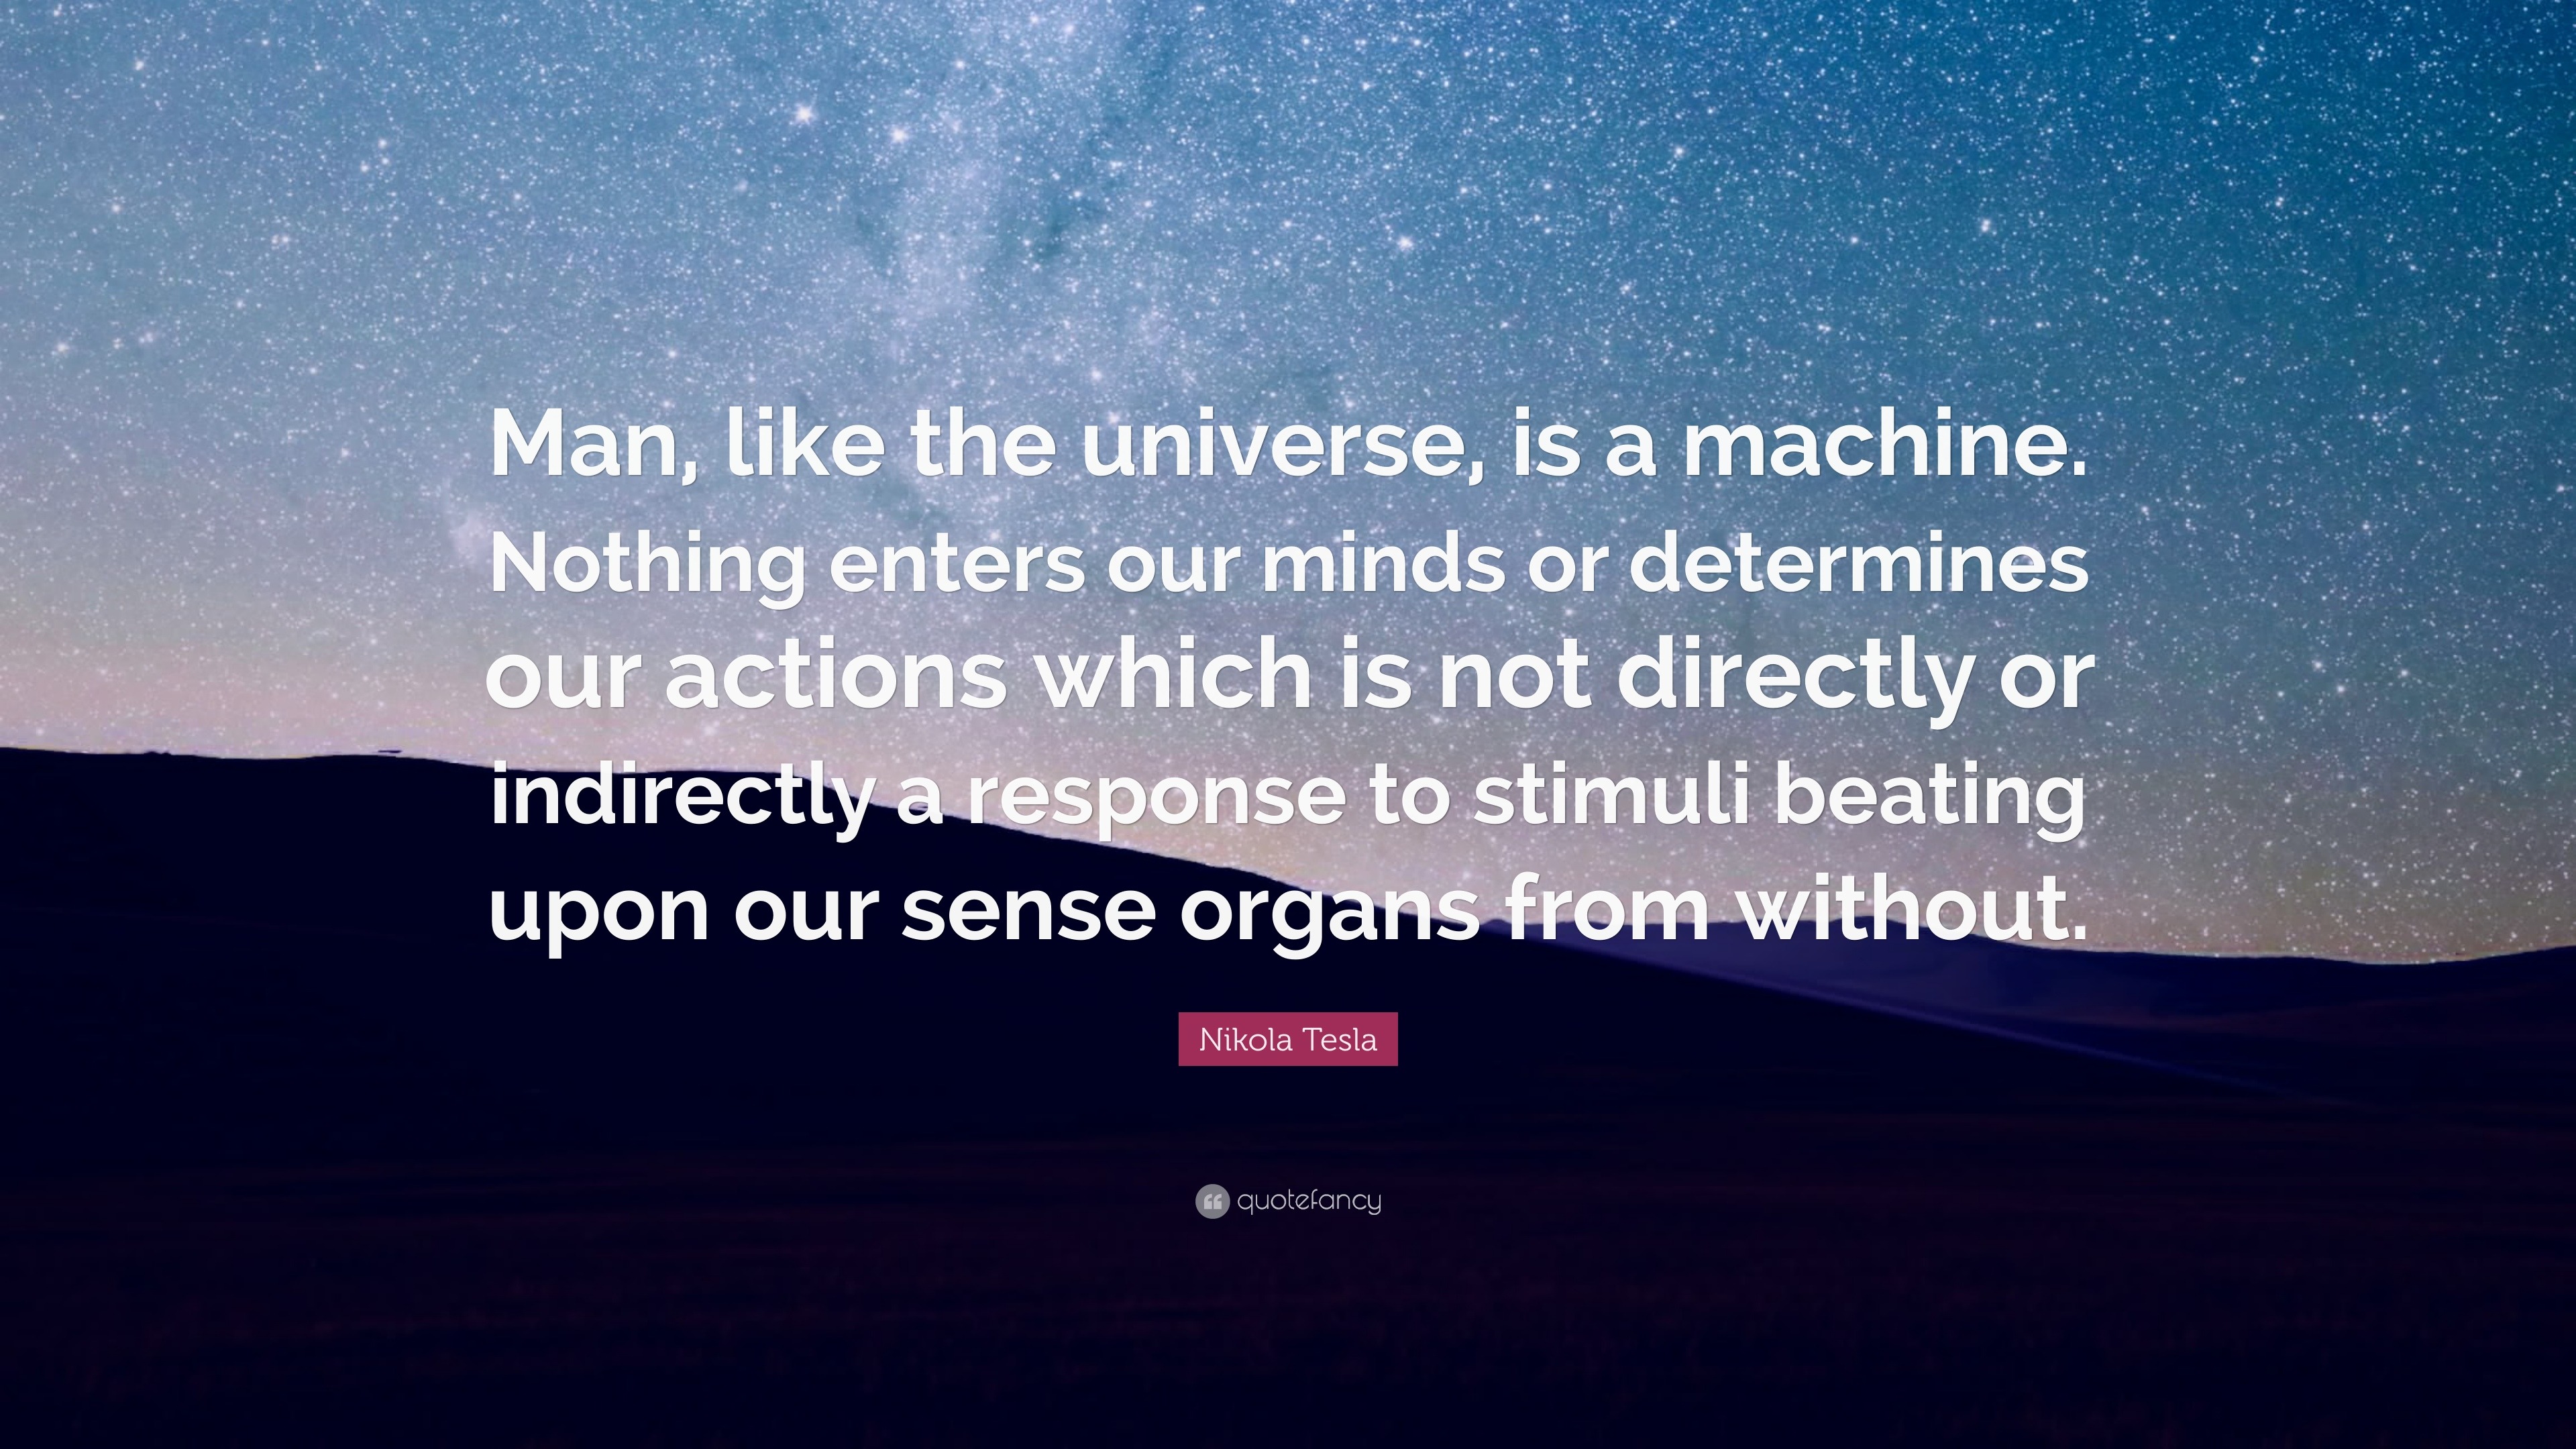 Nikola Tesla Quote: “Man, like the universe, is a machine. Nothing ...